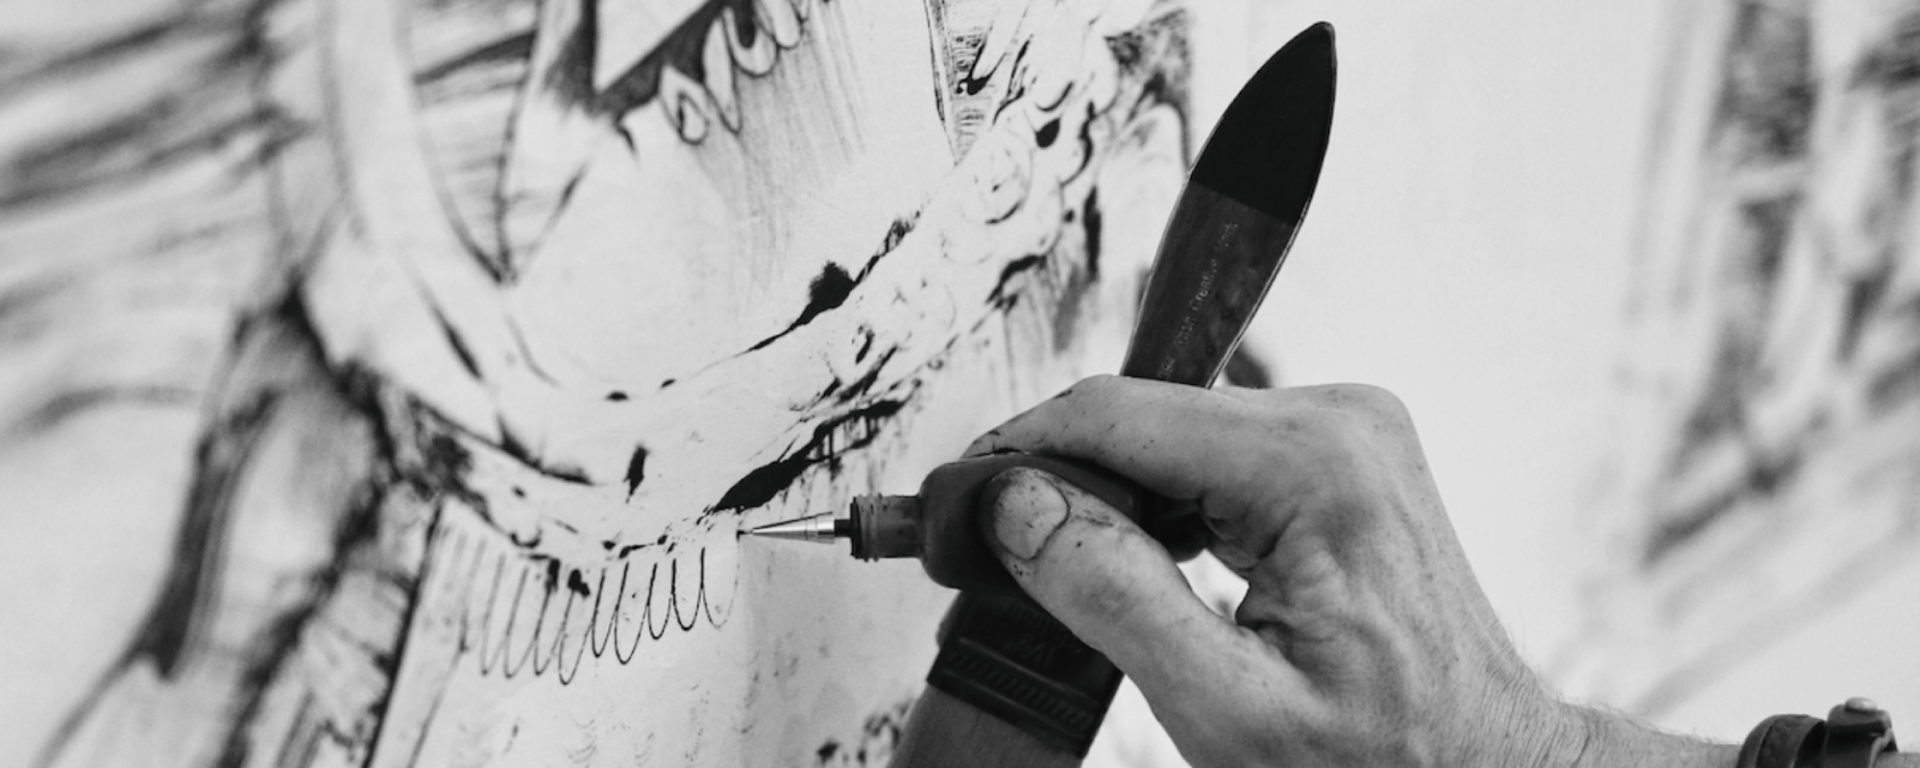 Close up of artist Kevork Mourad making a drawing. The image is cropped around his hand holding a drawing tool and brush as he makes marks on a white piece of paper.